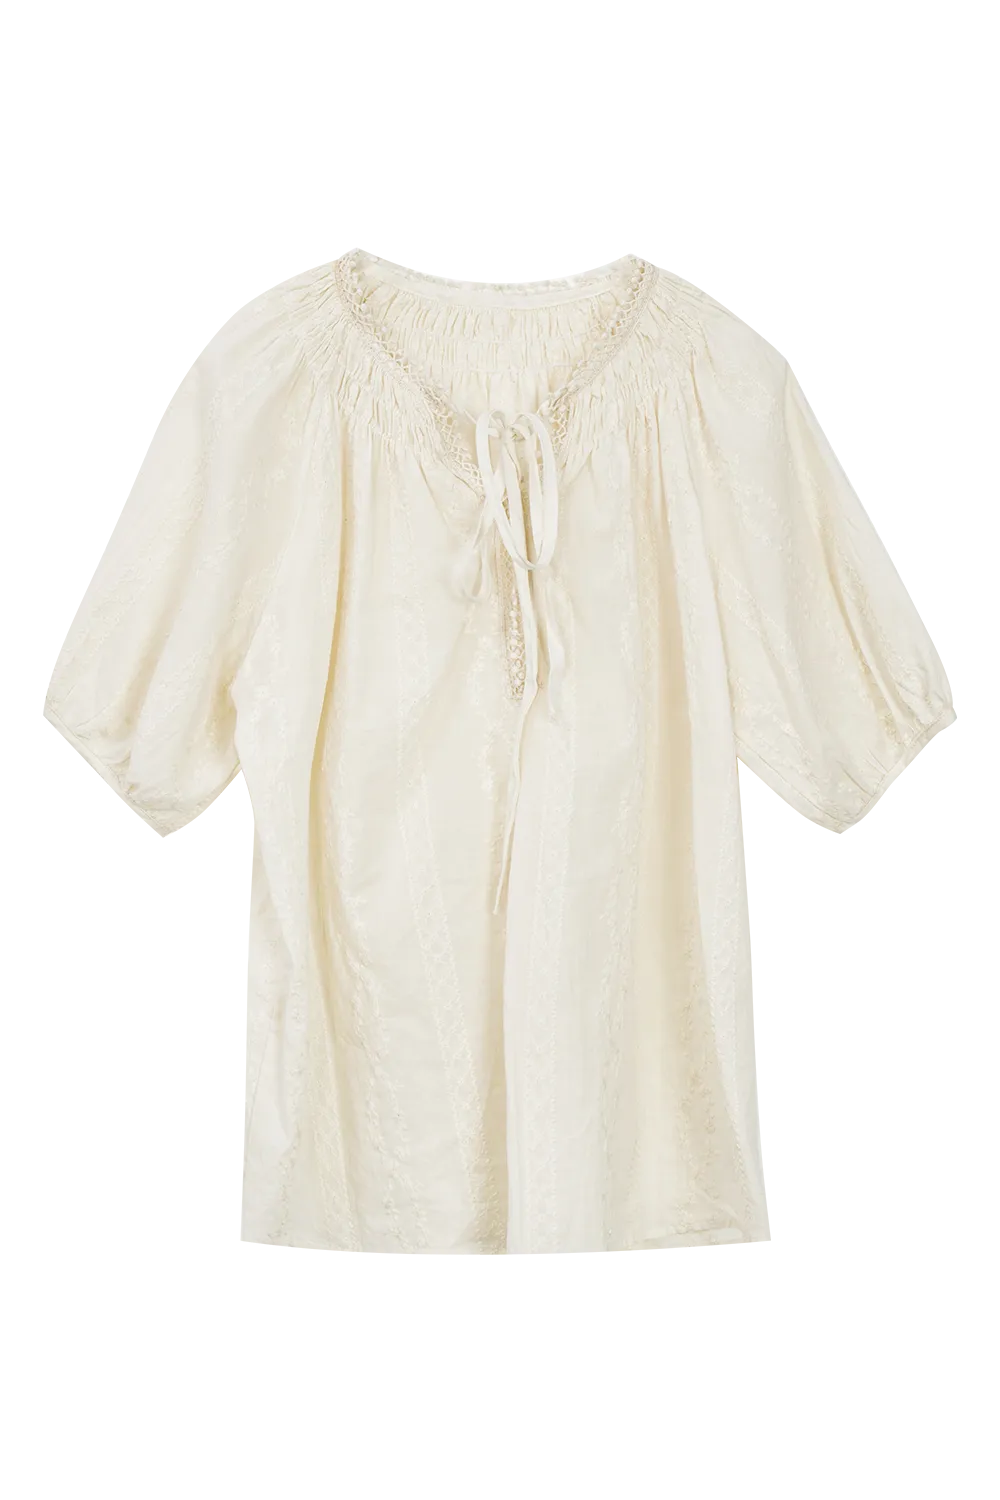 Women's Elegant Textured Blouse with Gathered Neckline and Tie-Front